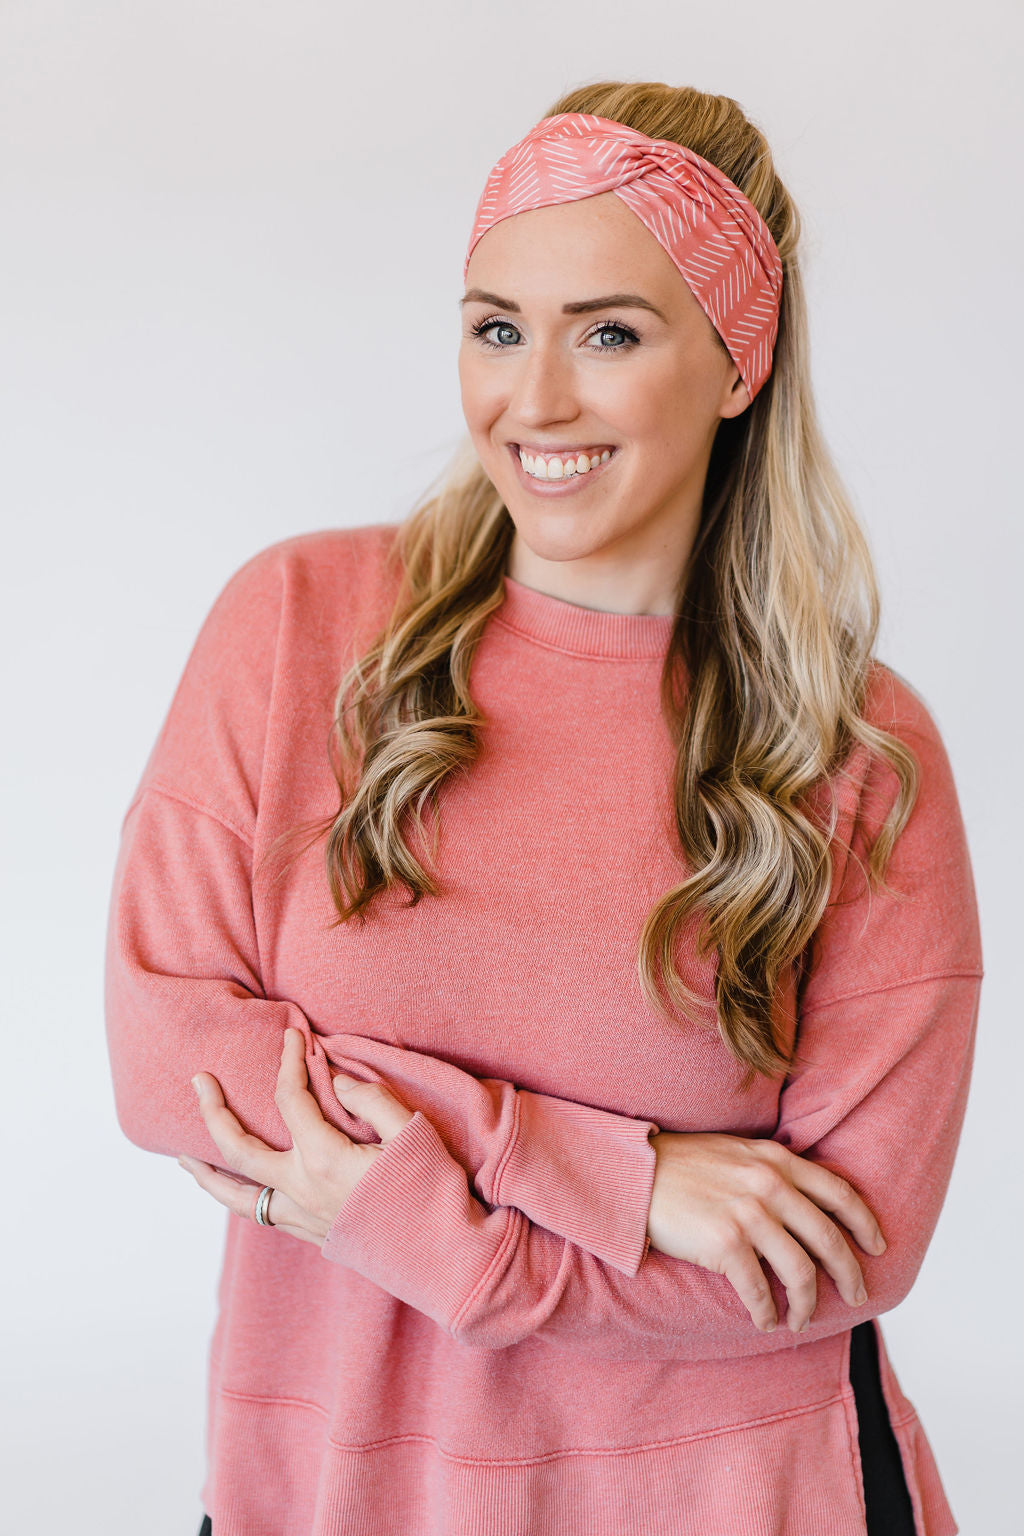 Adult women's coral headband with white slanted lines